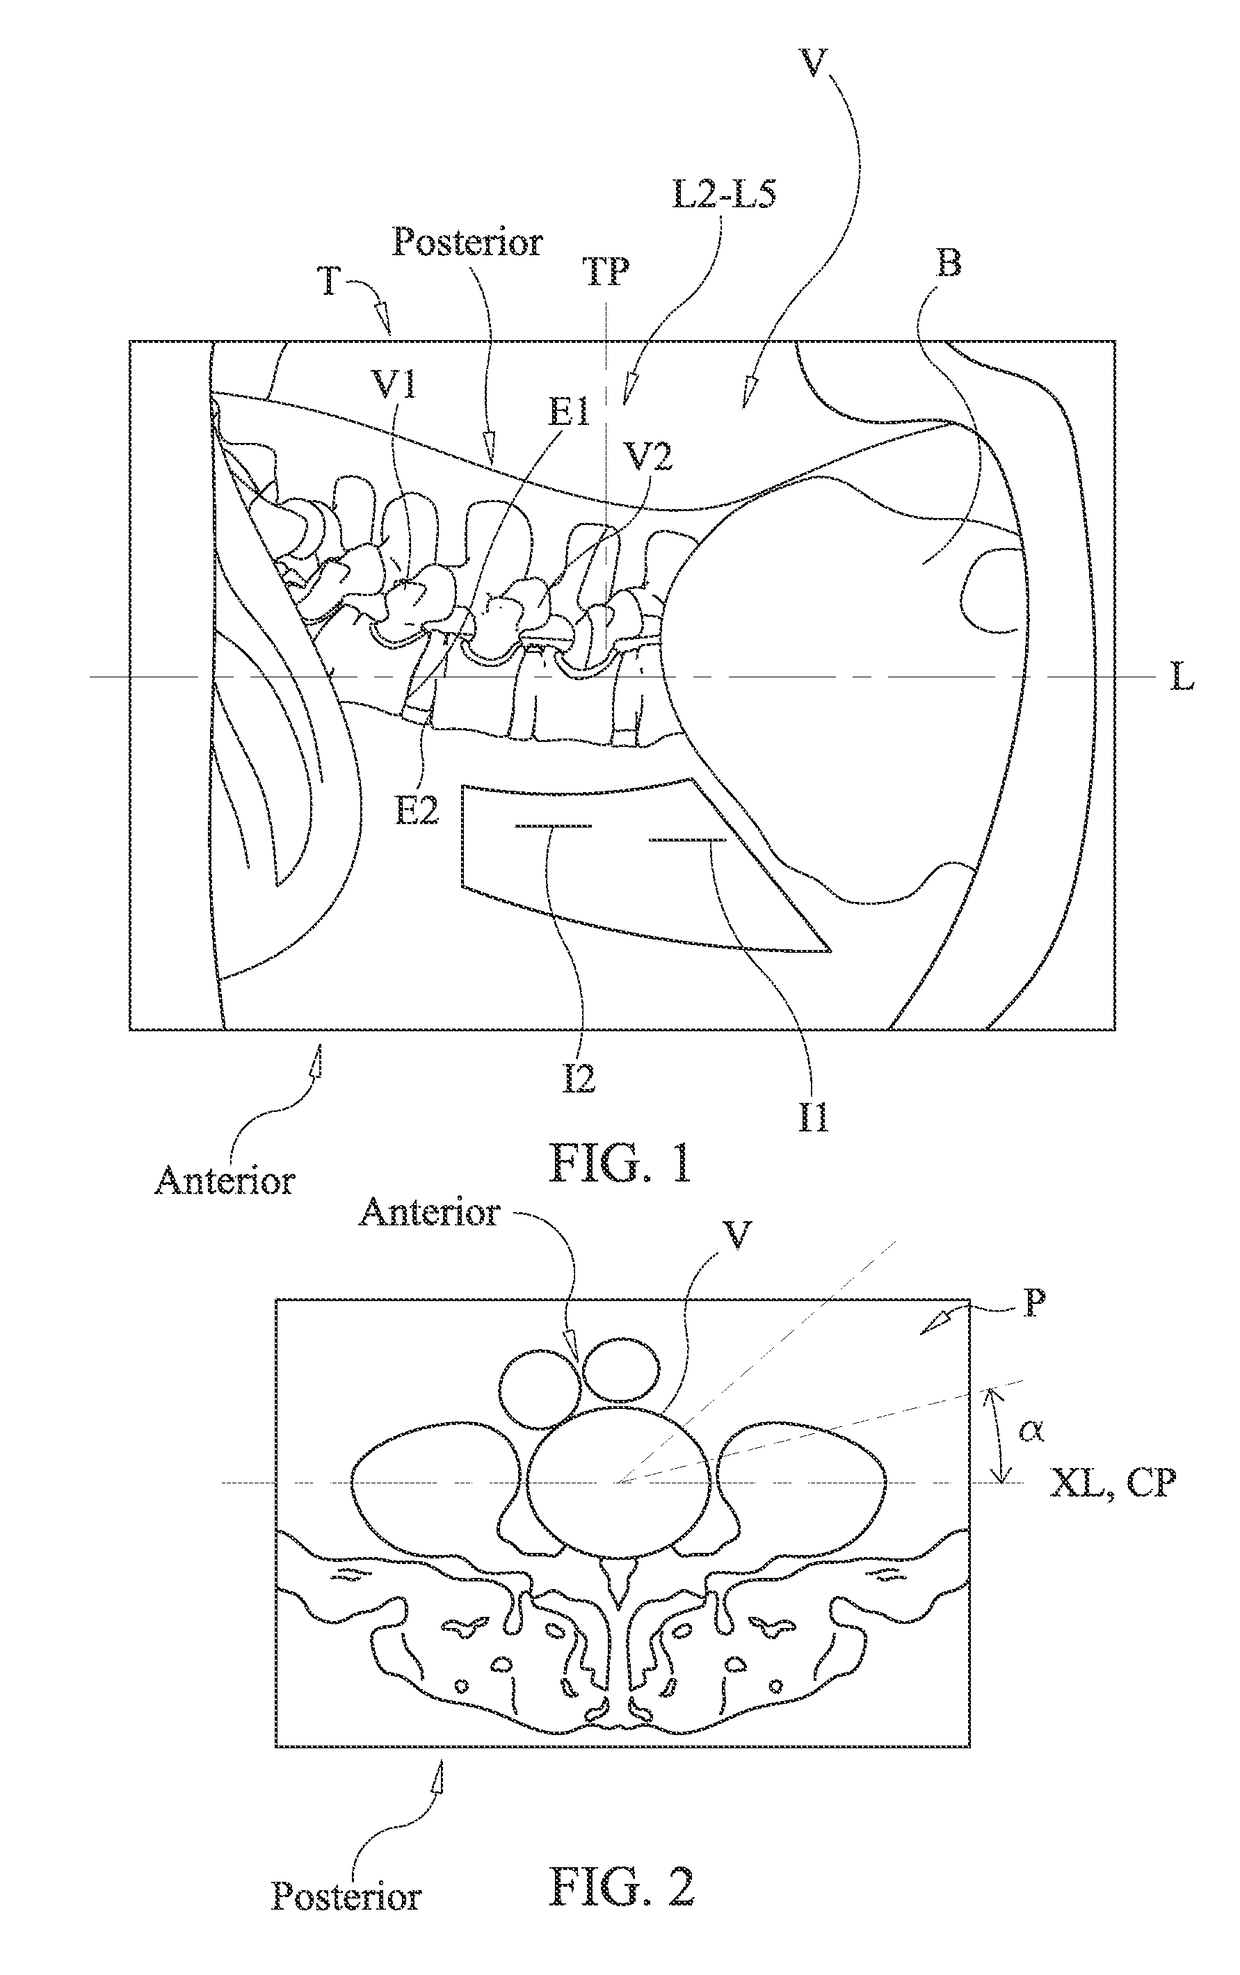 Spinal implant system and method